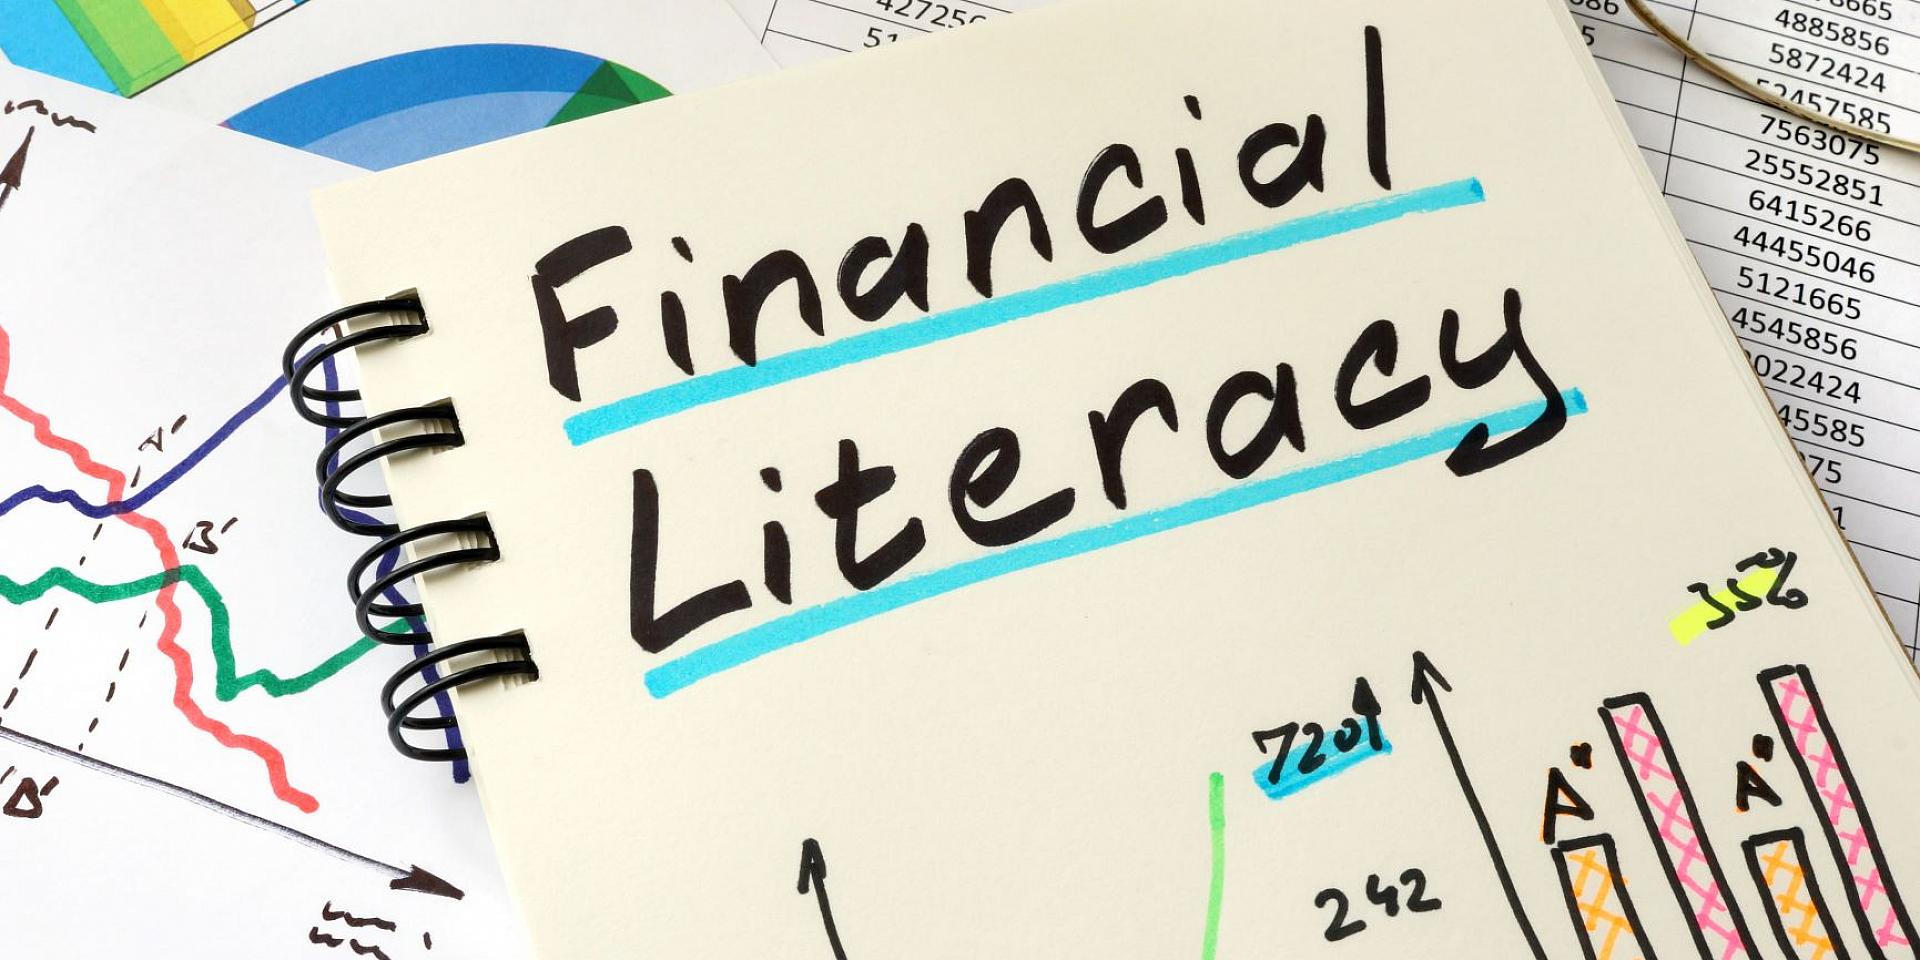 Notebook with graphs and "Financial Literacy" written on top of it